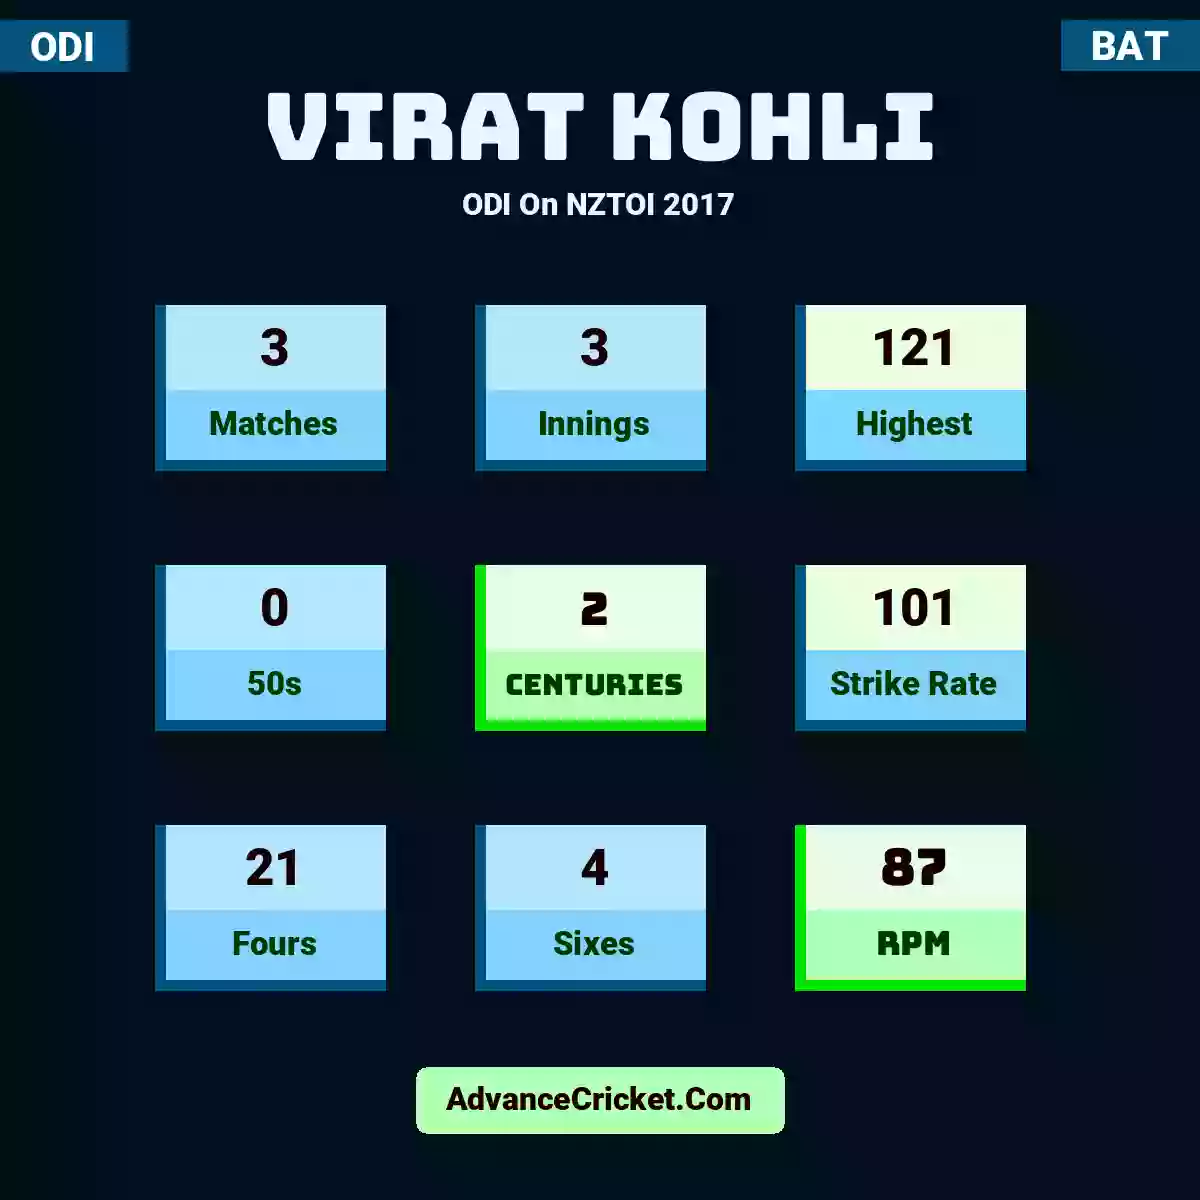 Virat Kohli ODI  On NZTOI 2017, Virat Kohli played 3 matches, scored 121 runs as highest, 0 half-centuries, and 2 centuries, with a strike rate of 101. V.Kohli hit 21 fours and 4 sixes, with an RPM of 87.